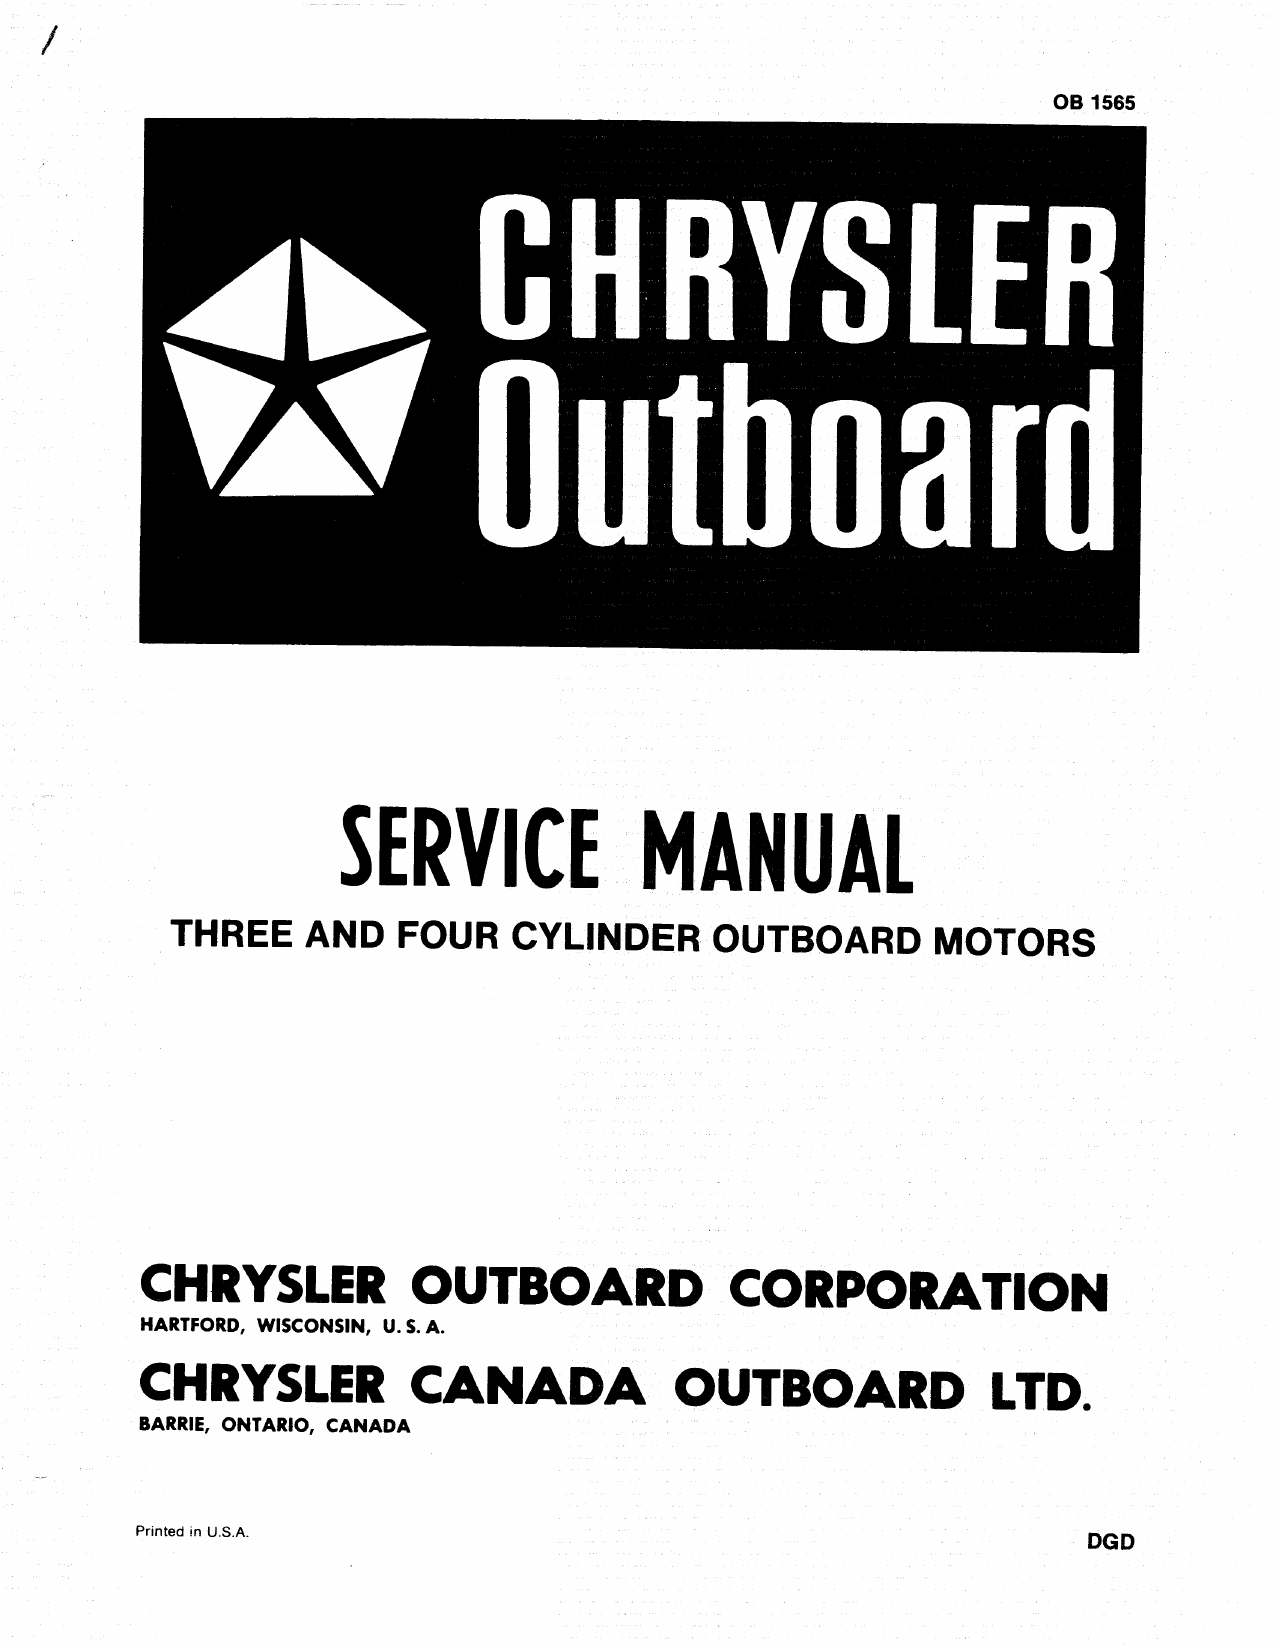 1969-1973 Chrysler 70 hp, 75 hp, 80 hp, 90 hp, 105 hp, 115 hp, 120 hp, 130 hp, 135 hp, 150 hp outboard motor service manual Preview image 1